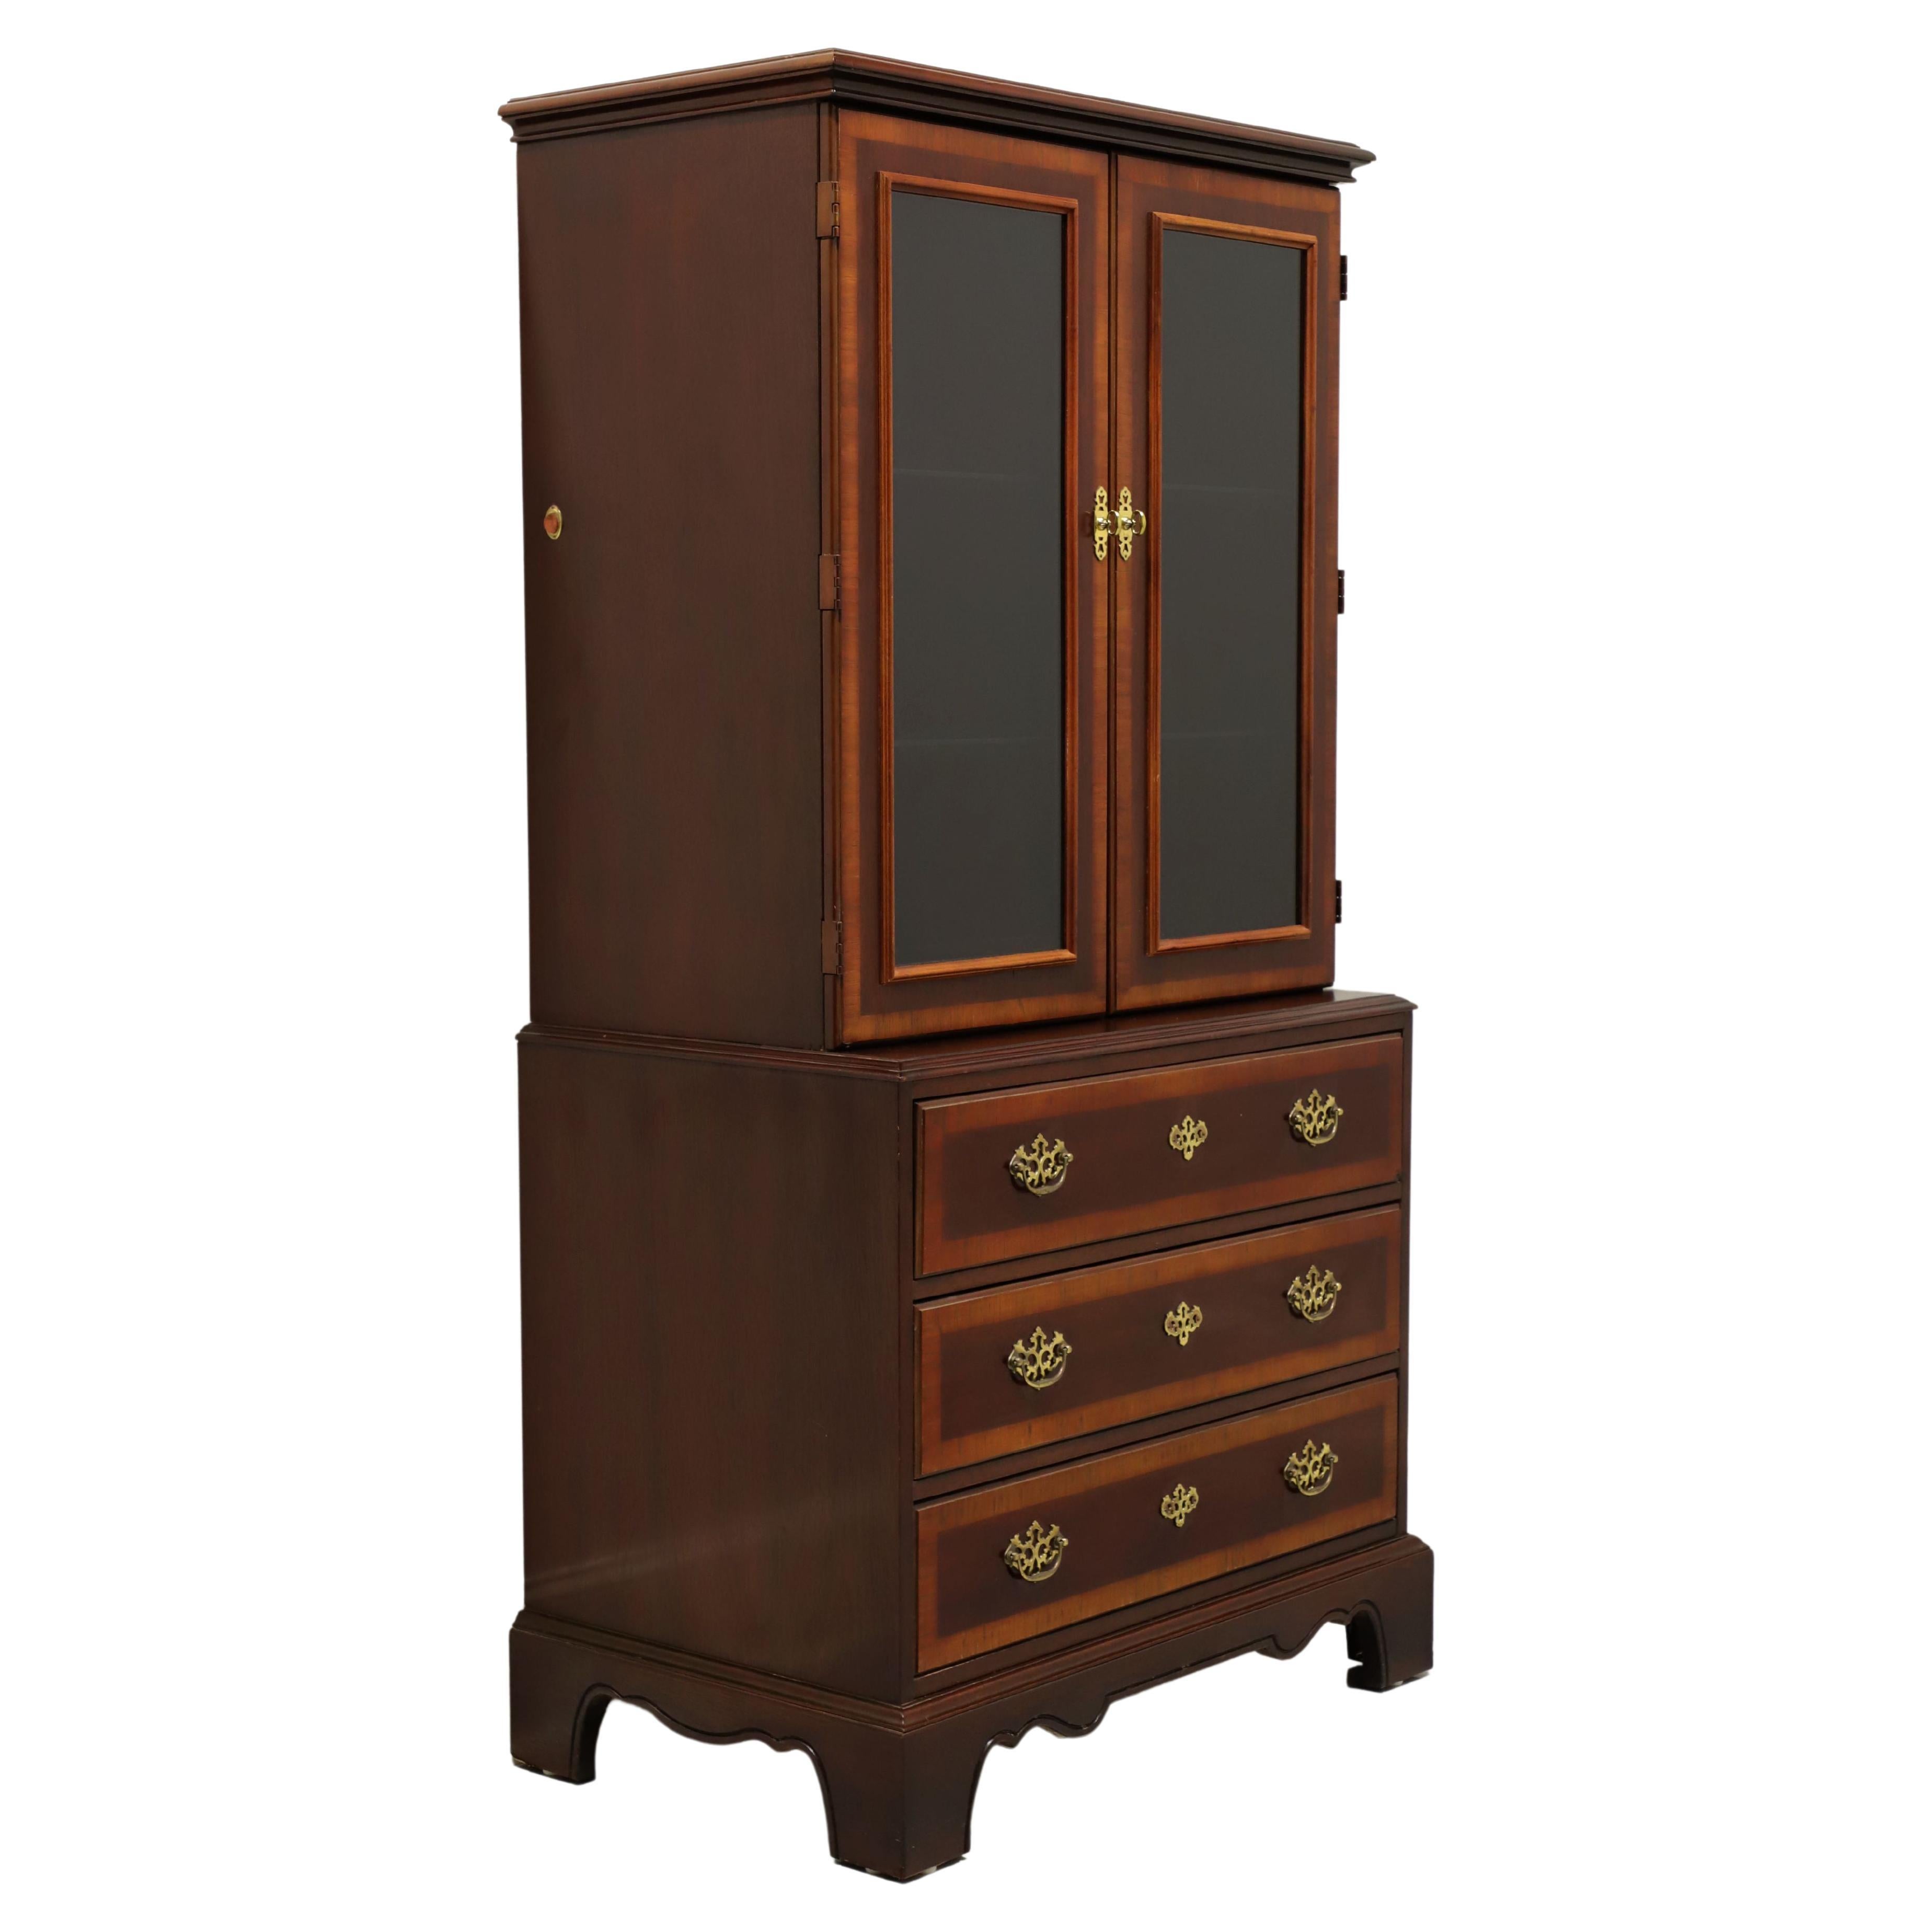 DREXEL 18th Century Collection Banded Mahogany Curio / Display Cabinet - B For Sale